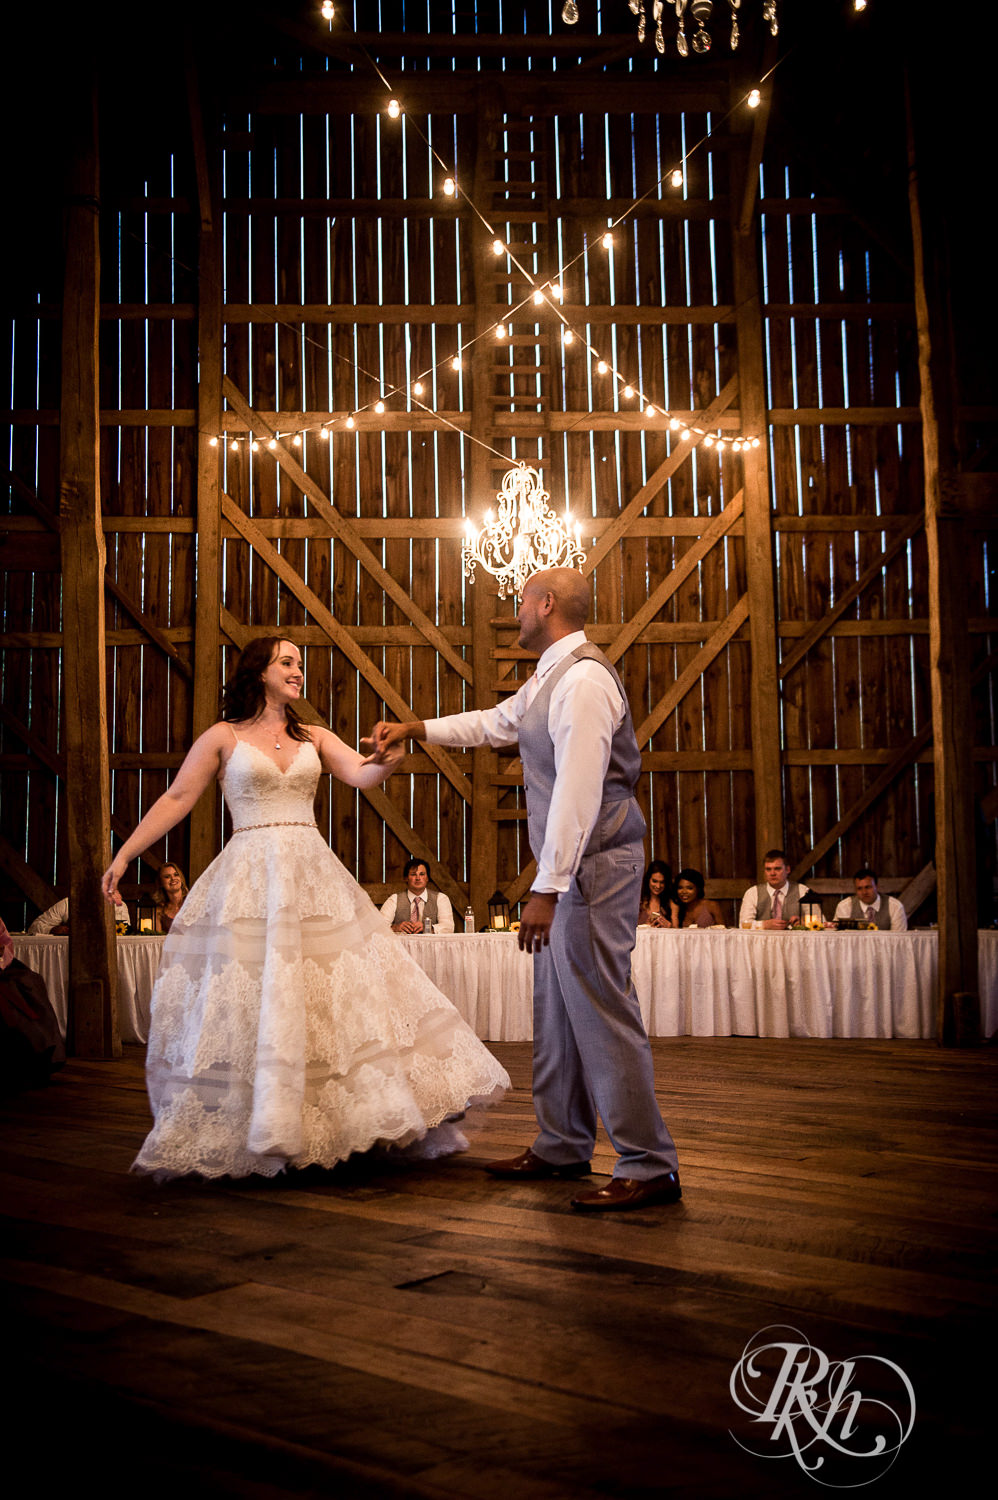 Bride and Asian groom dance under a chandelier during wedding reception at Birch Hill Barn in Glenwood City, Wisconsin.